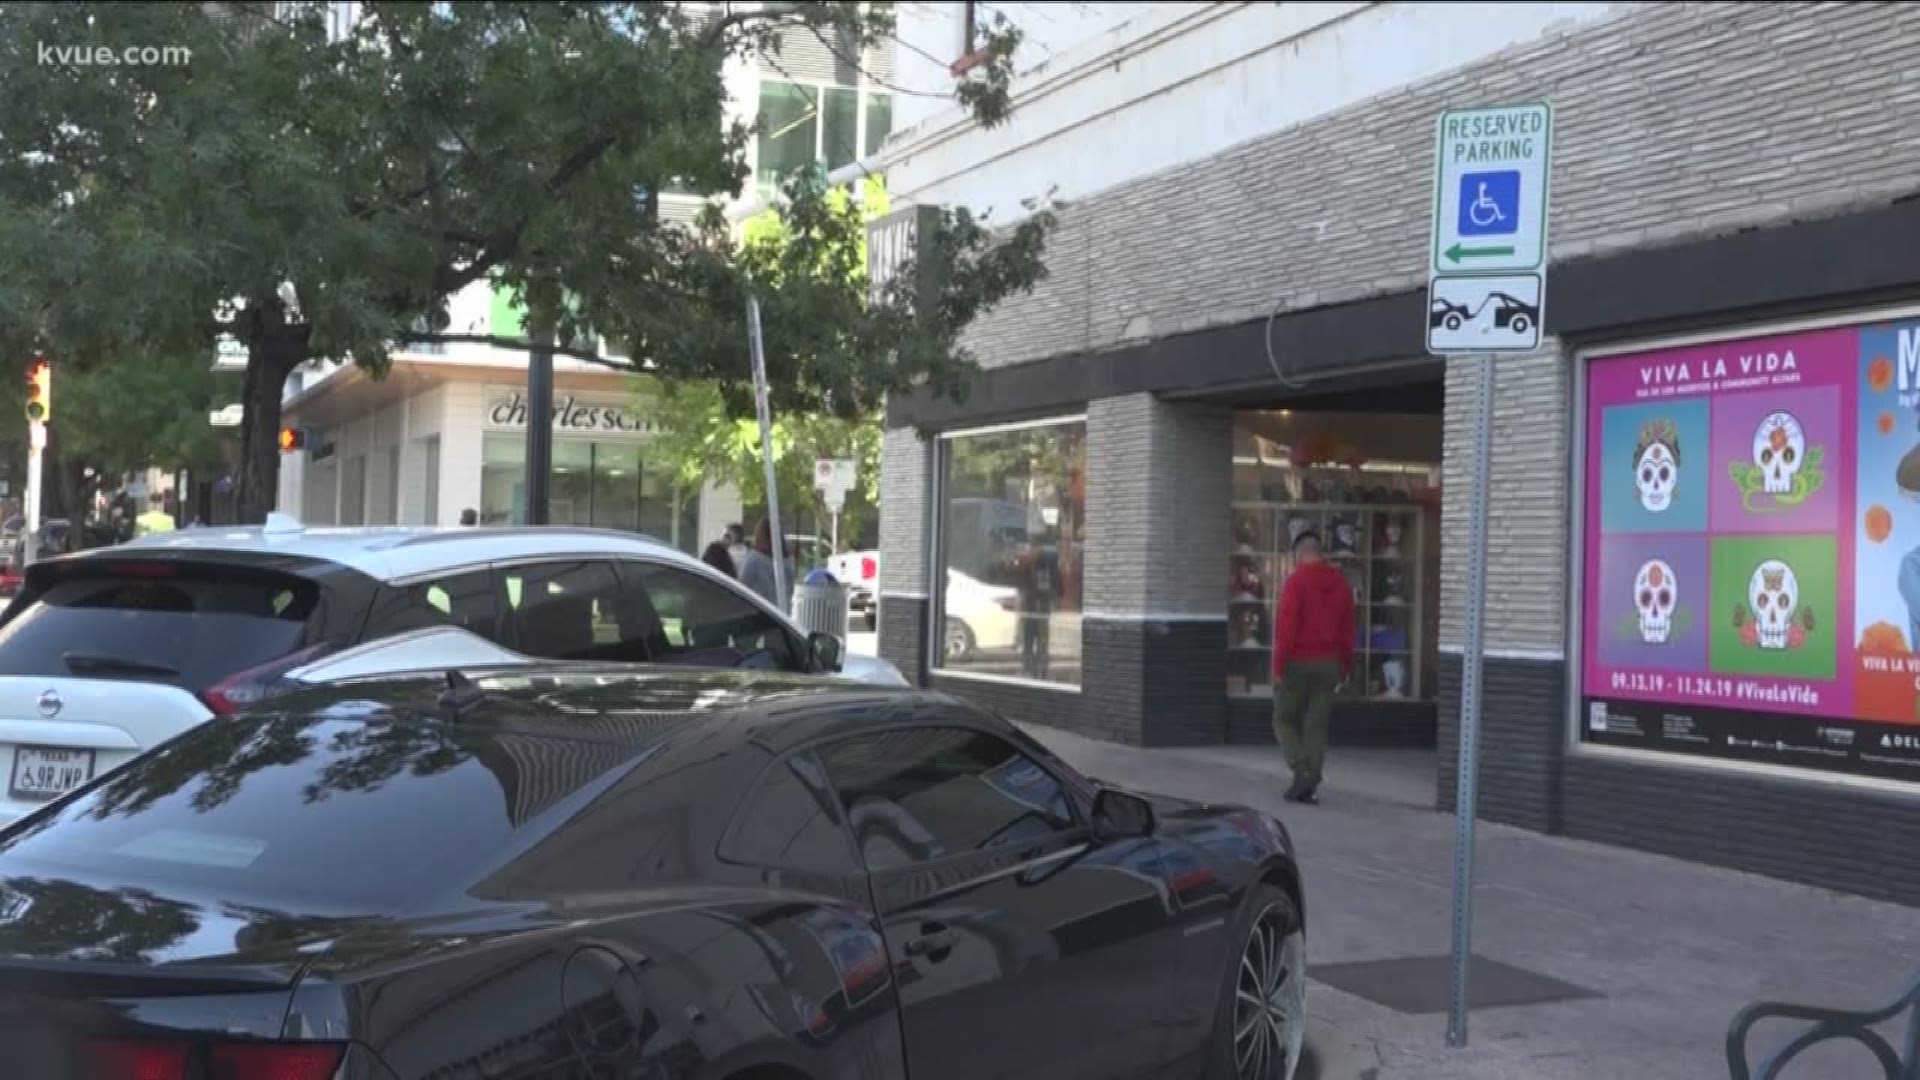 When you go Downtown, you likely anticipate the struggle of circling the block for a parking spot. But for people with disabilities, it can be even more difficult.